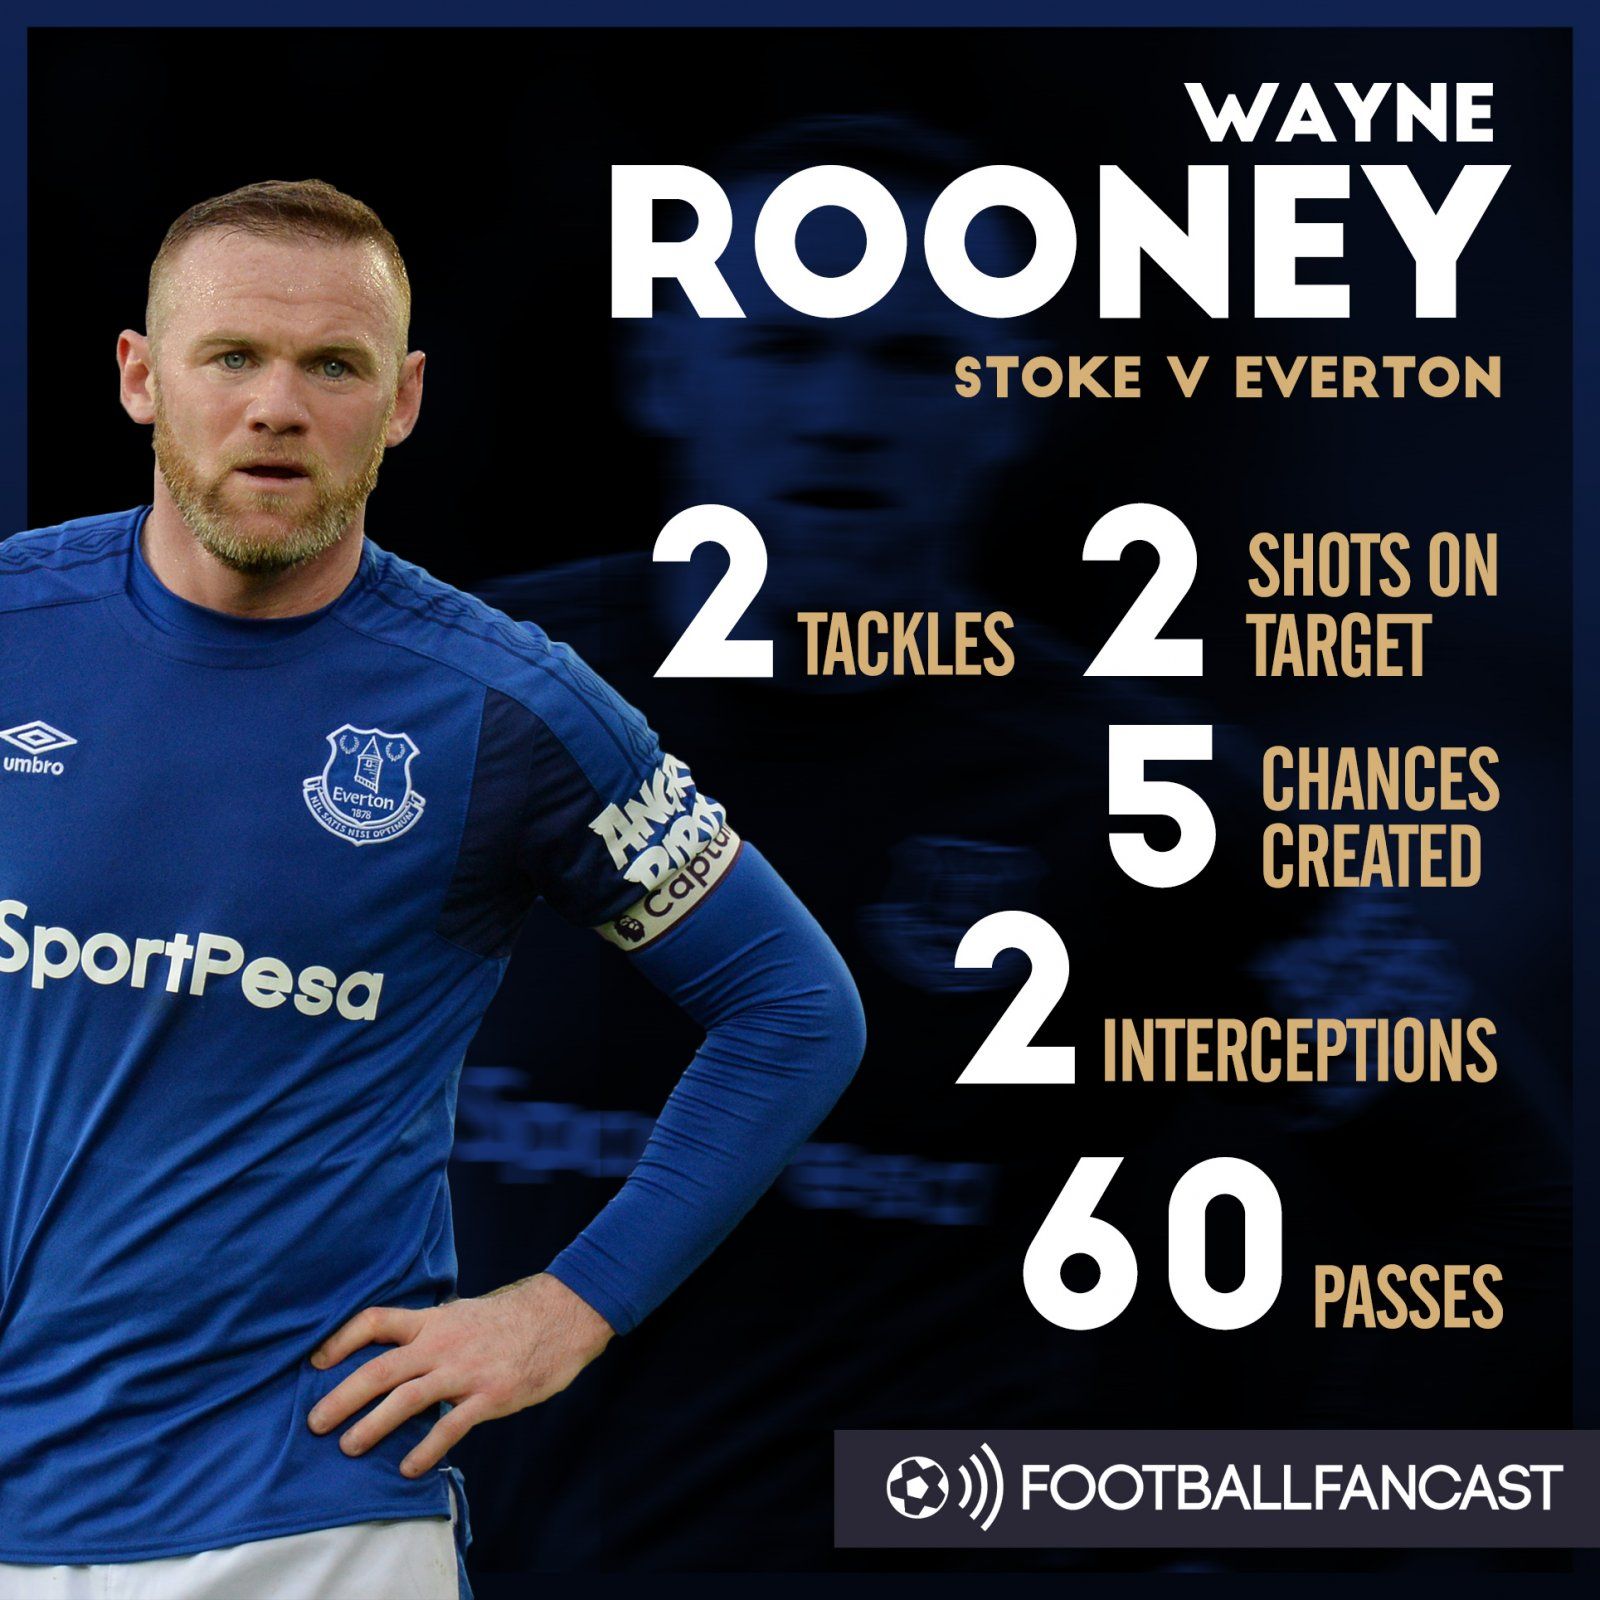 Wayne Rooney's stats from Everton's 2-1 win over Stoke